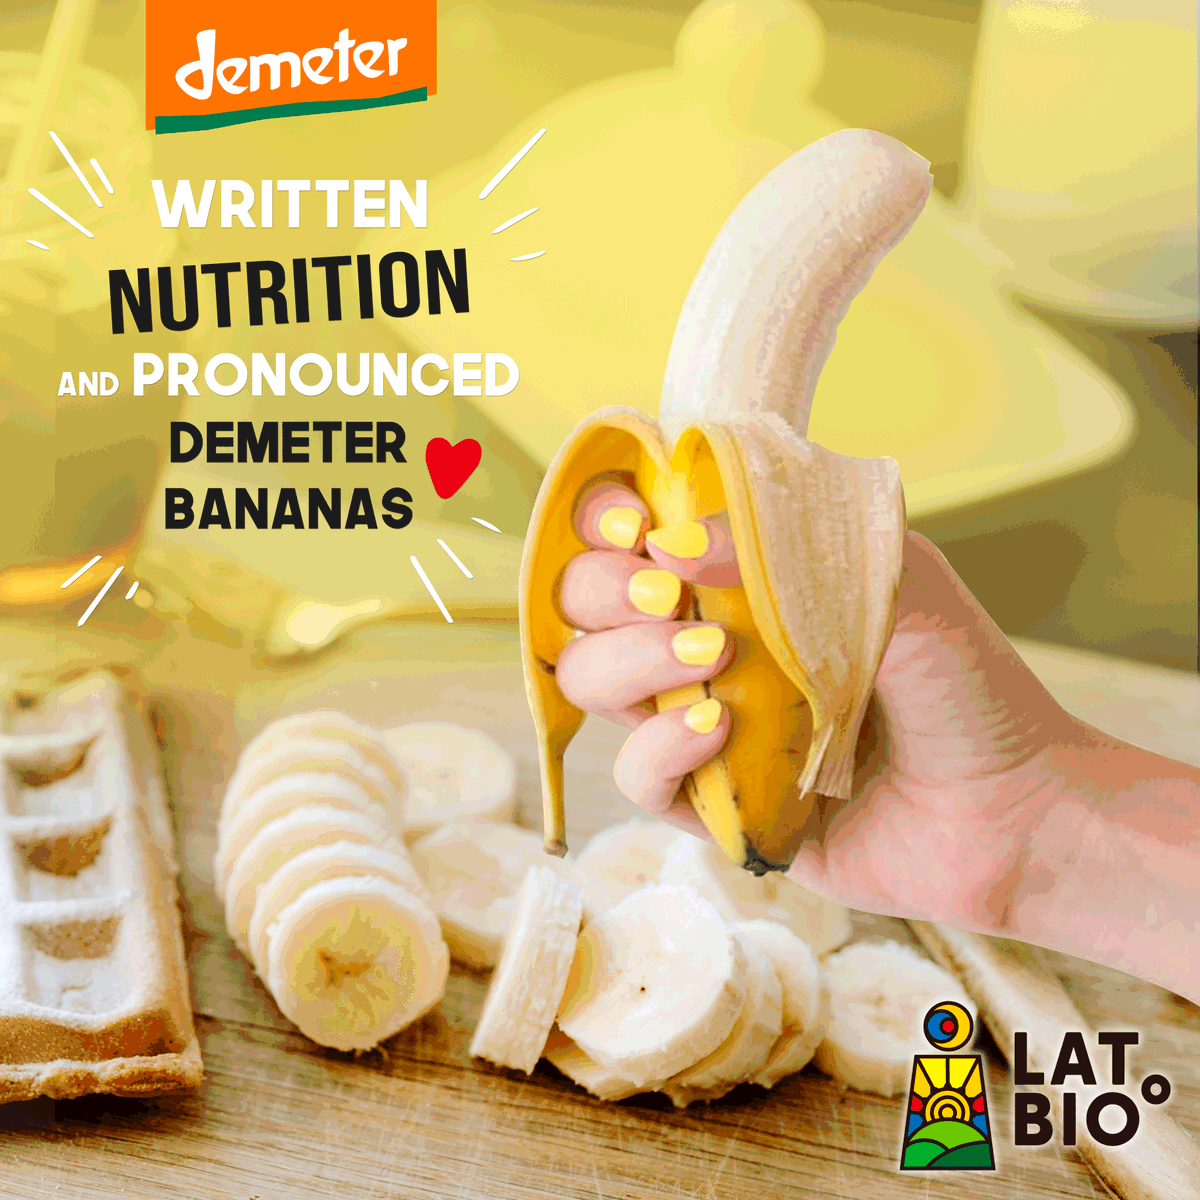 Demeter bananas pick up the flavor naturally from the living soil, water and sun. Did you try it? Its flavor is very sweet.🍌👏👏
#demeterbananas #Latbio #biodynamicagriculture